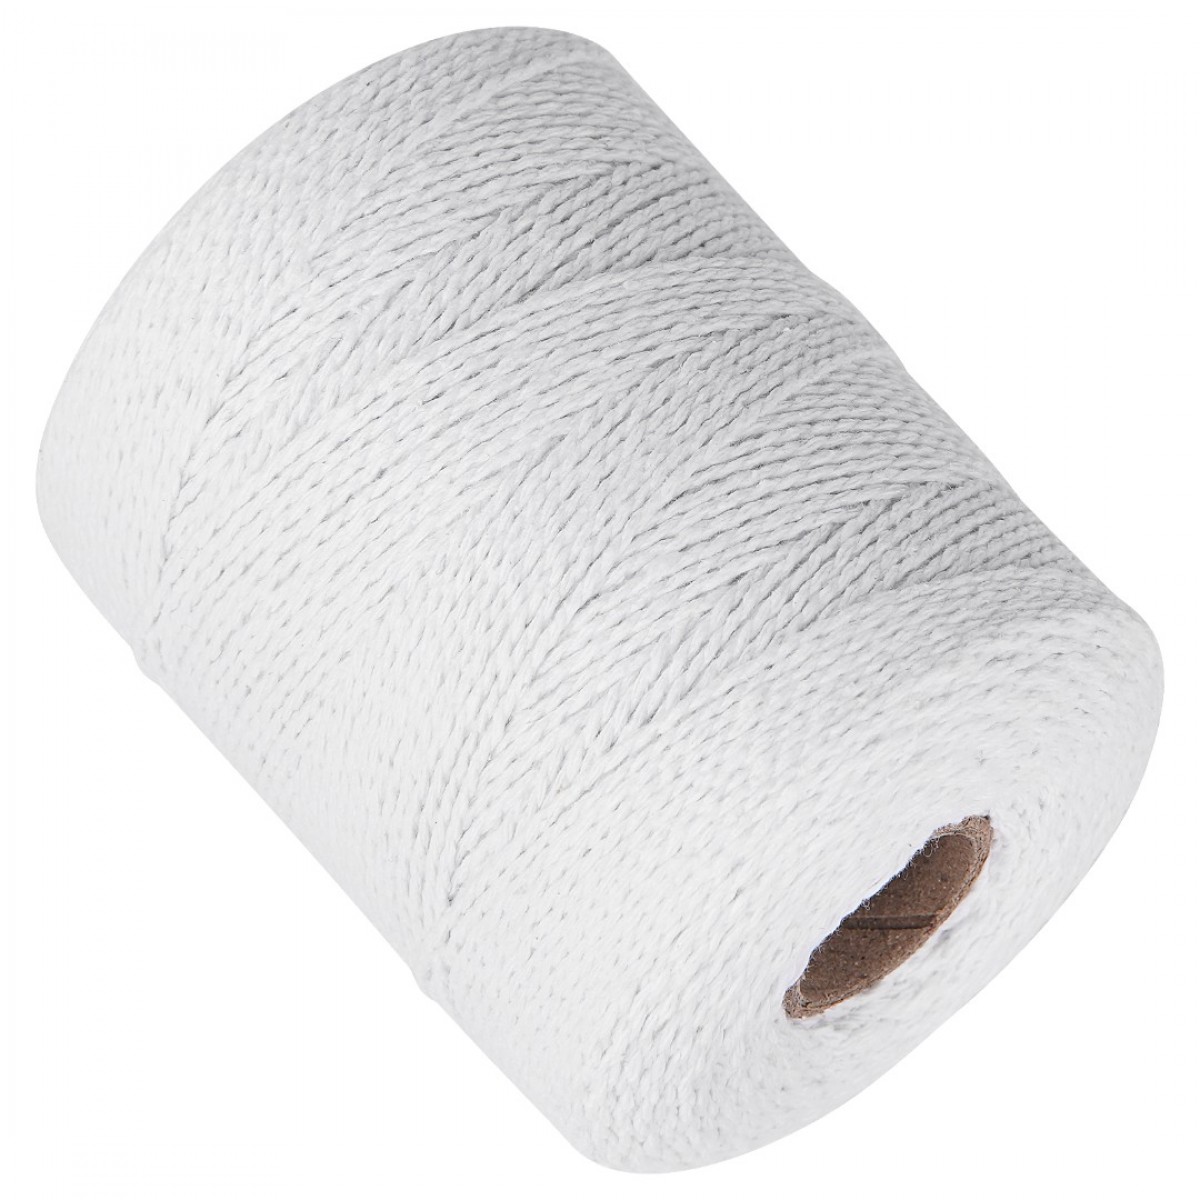 Ohtomber White Cotton Twine String - 984 Feet 2MM Thick Butchers Twine, Kitchen Cooking Bakers Twine